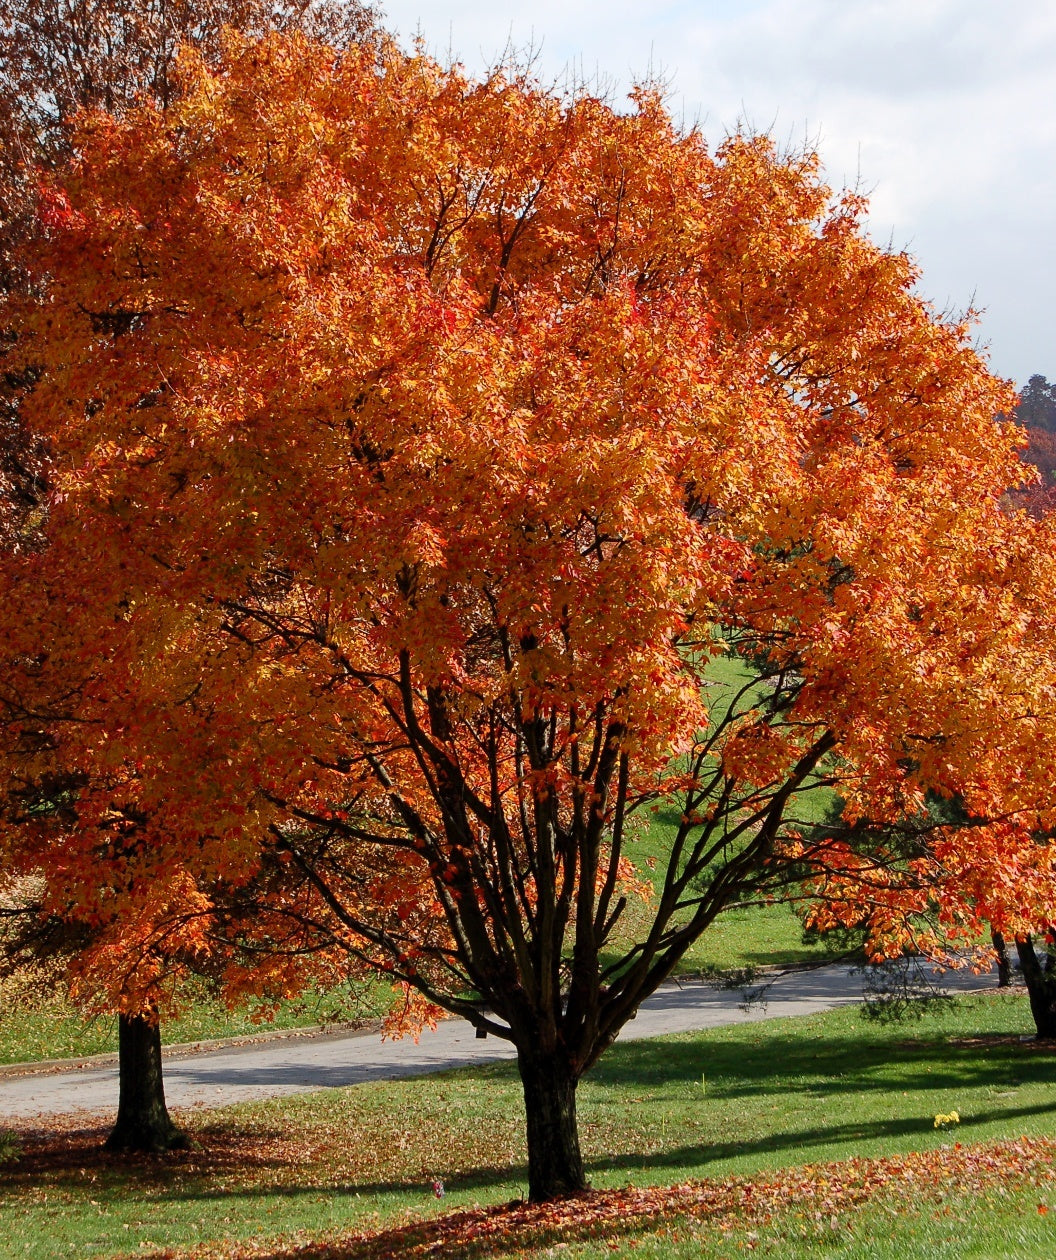 October Glory® Red Maple